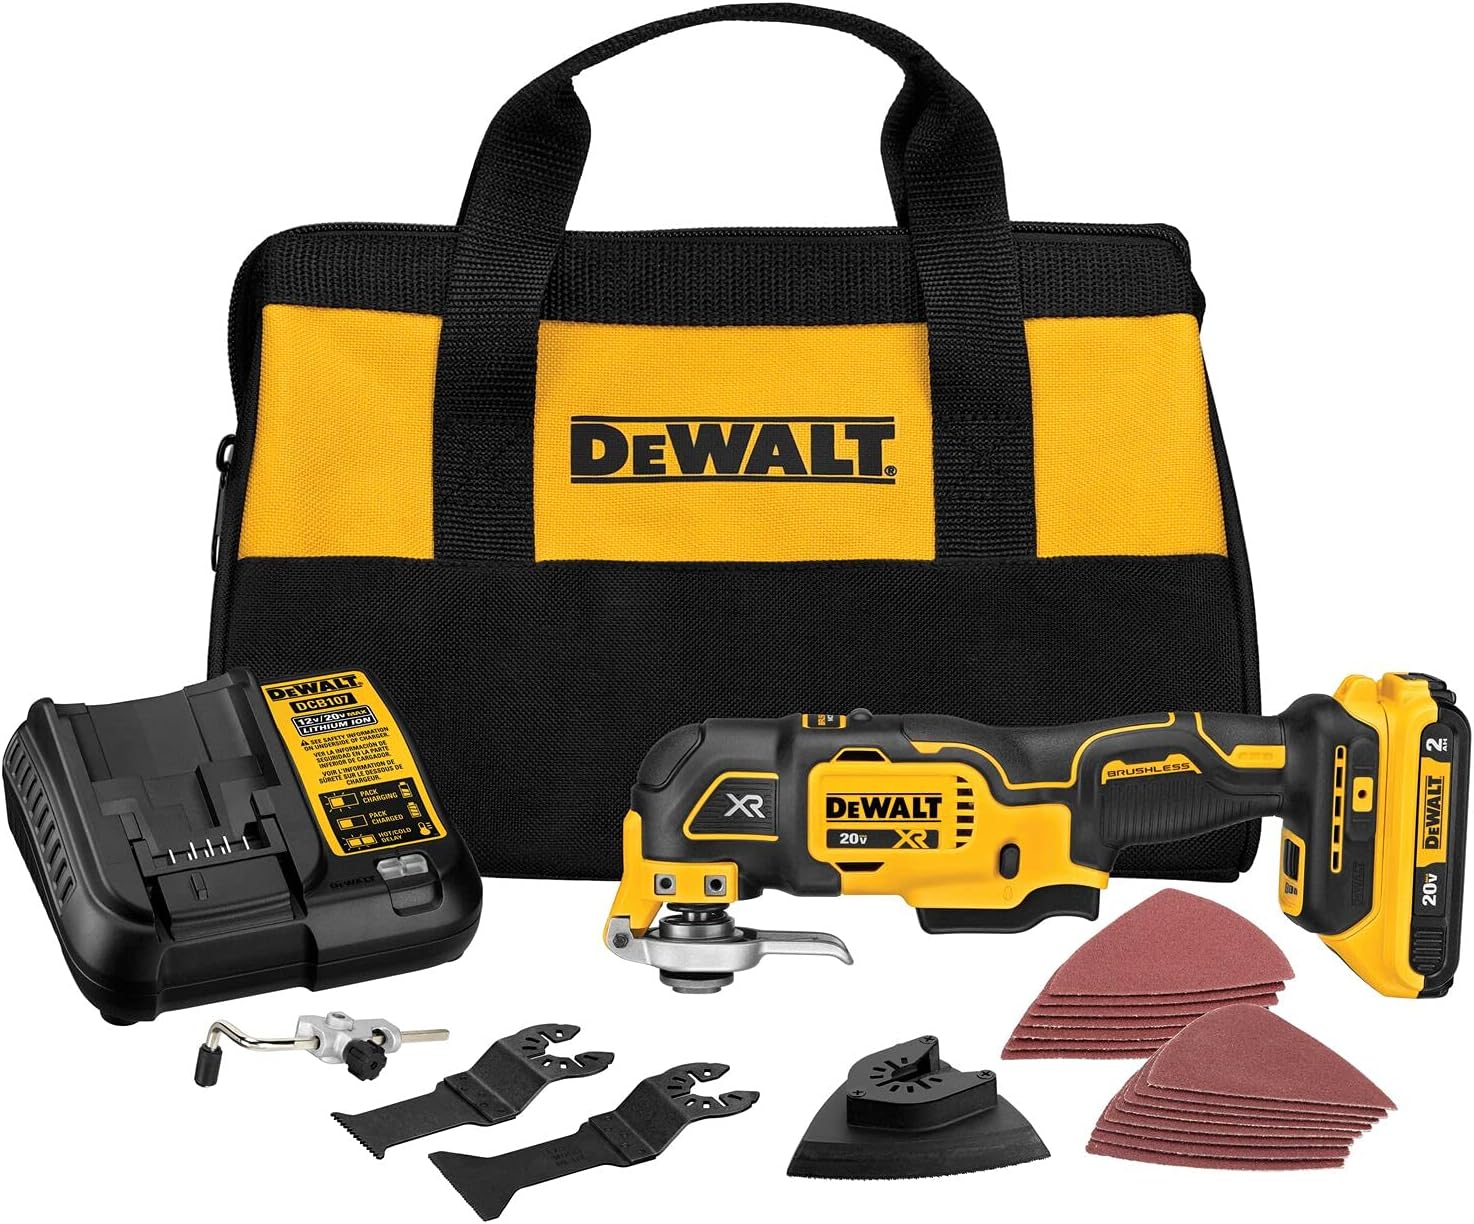 DEWALT 20V Oscillating Tool, Cordless, Wood Blades, Sandpaper, Tool Bag, Battery and Charger Included (DCS356SD1)